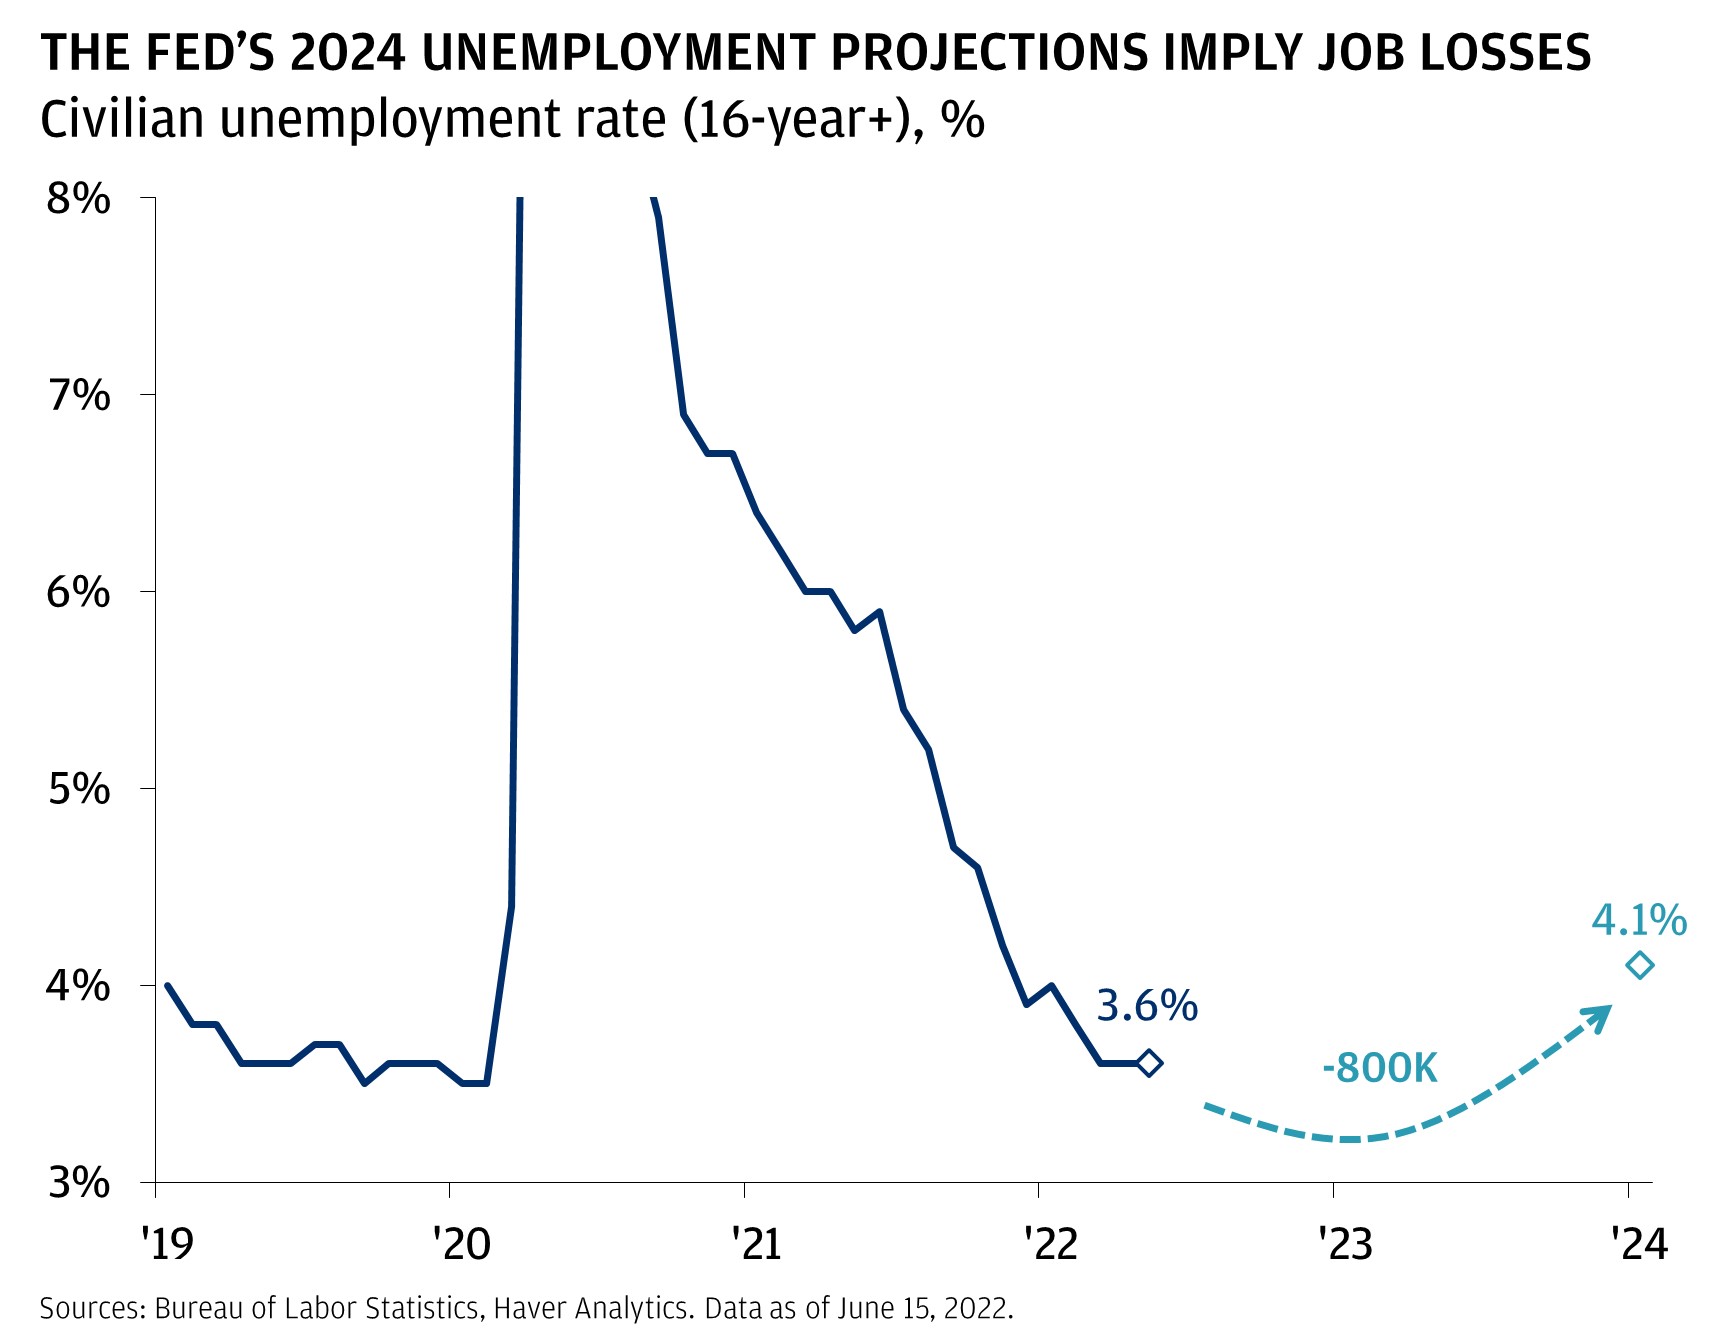 This chart shows the civilian unemployment rate (16yr+) from January 2019 until May 2022, and expectations for 2024.